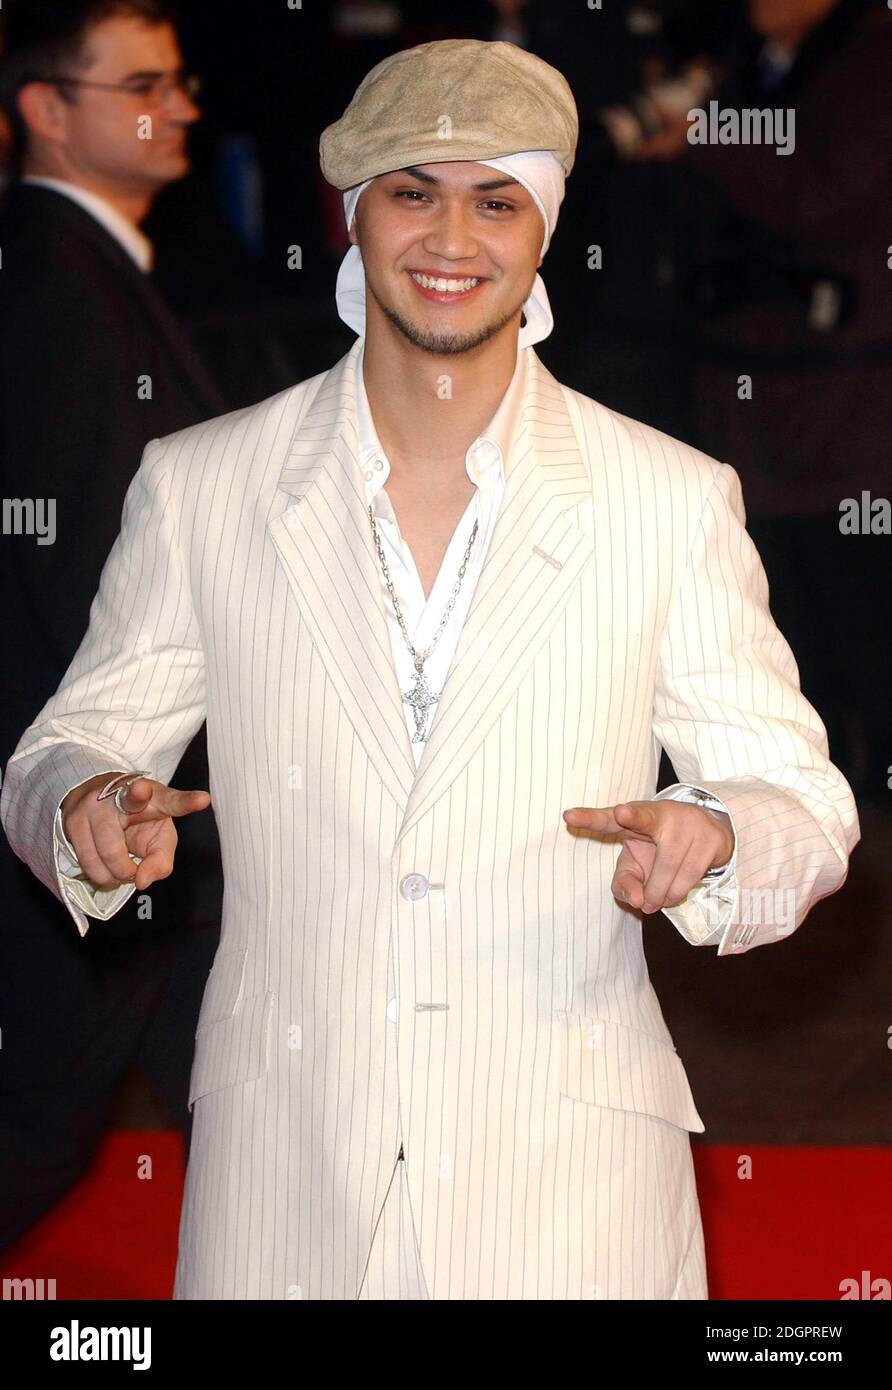 Billy Crawford arriving at the NRJ Awards in Cannes, France. Doug Peters/allactiondigital.com  65692-3482    Stock Photo